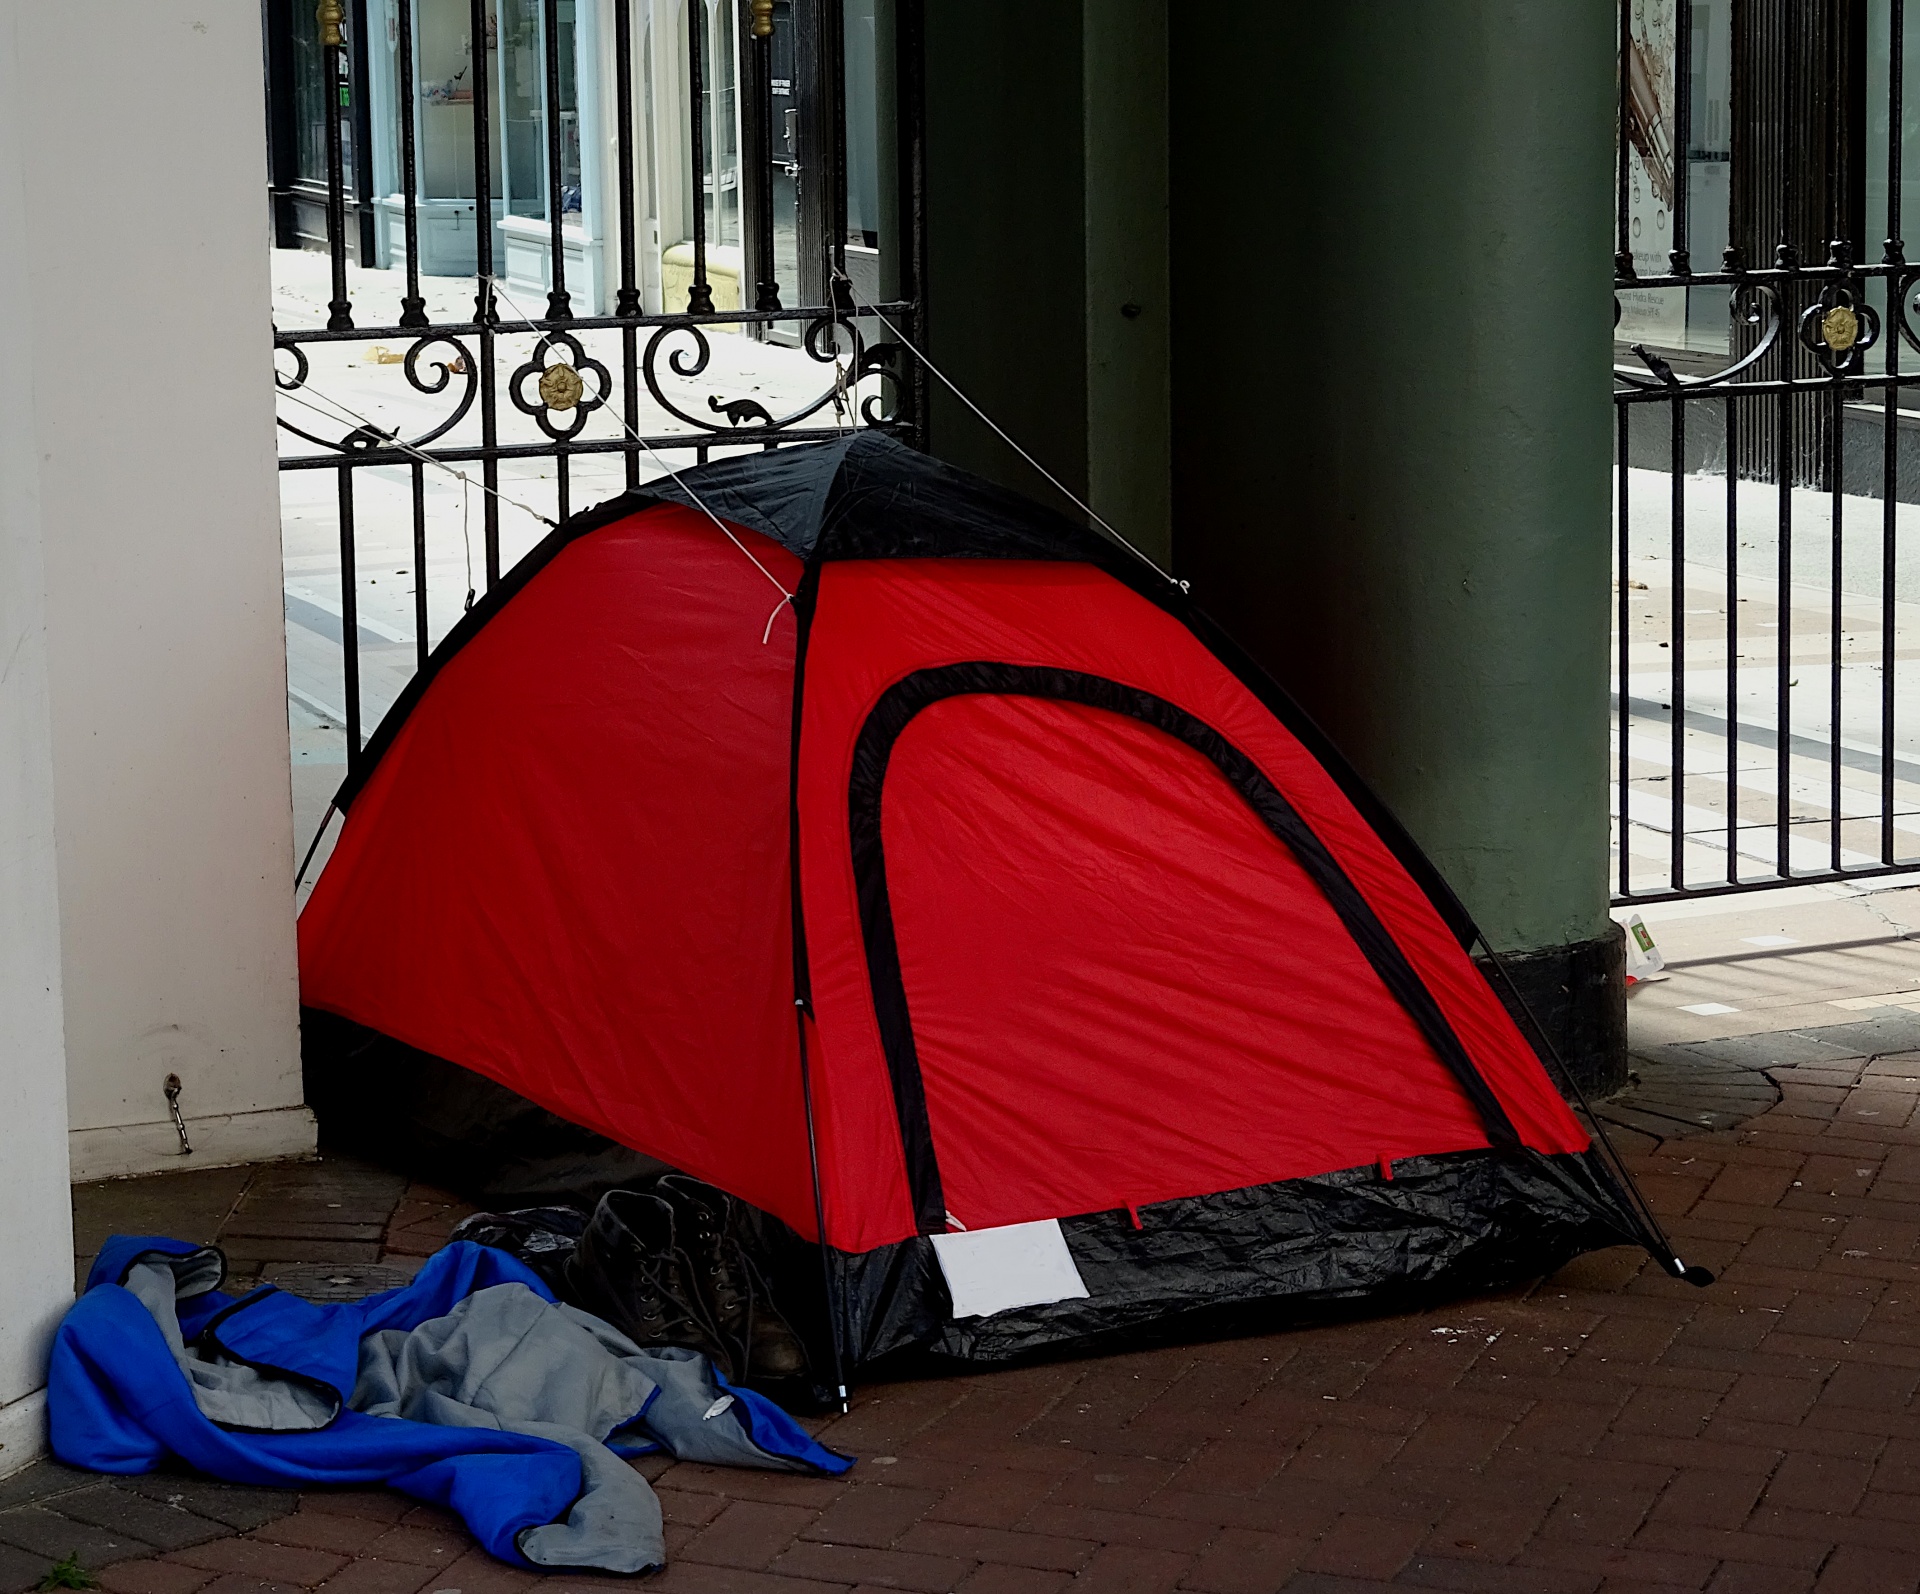 Homeless Persons Tent Home